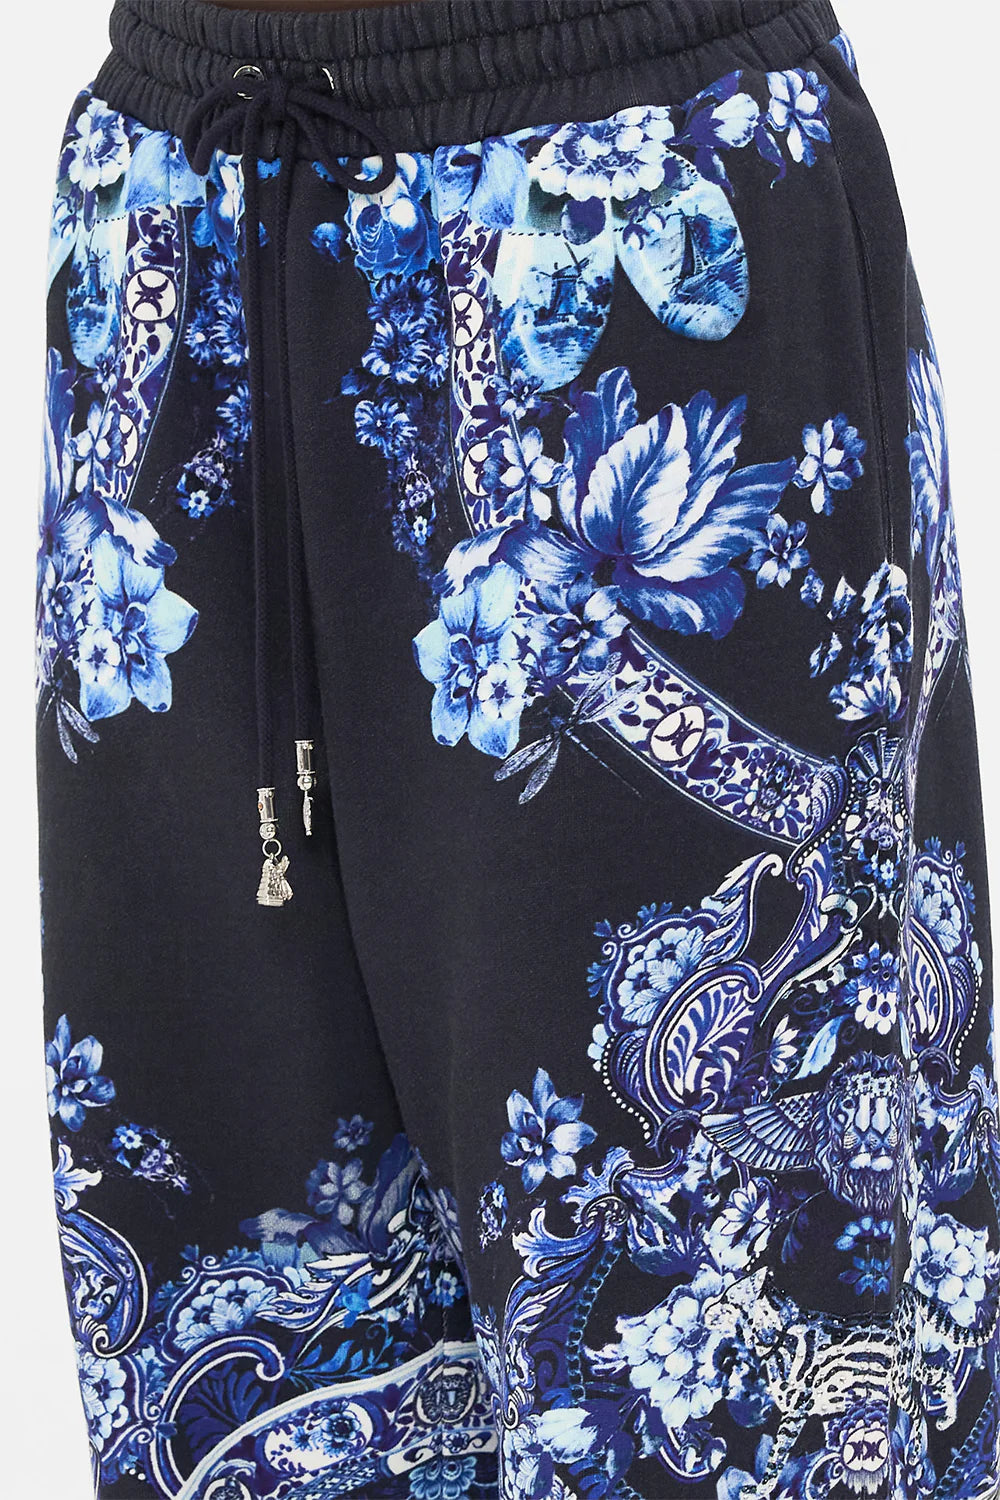 CAMILLA -  Jersey Track Pant Delft Dynasty - Magpie Style